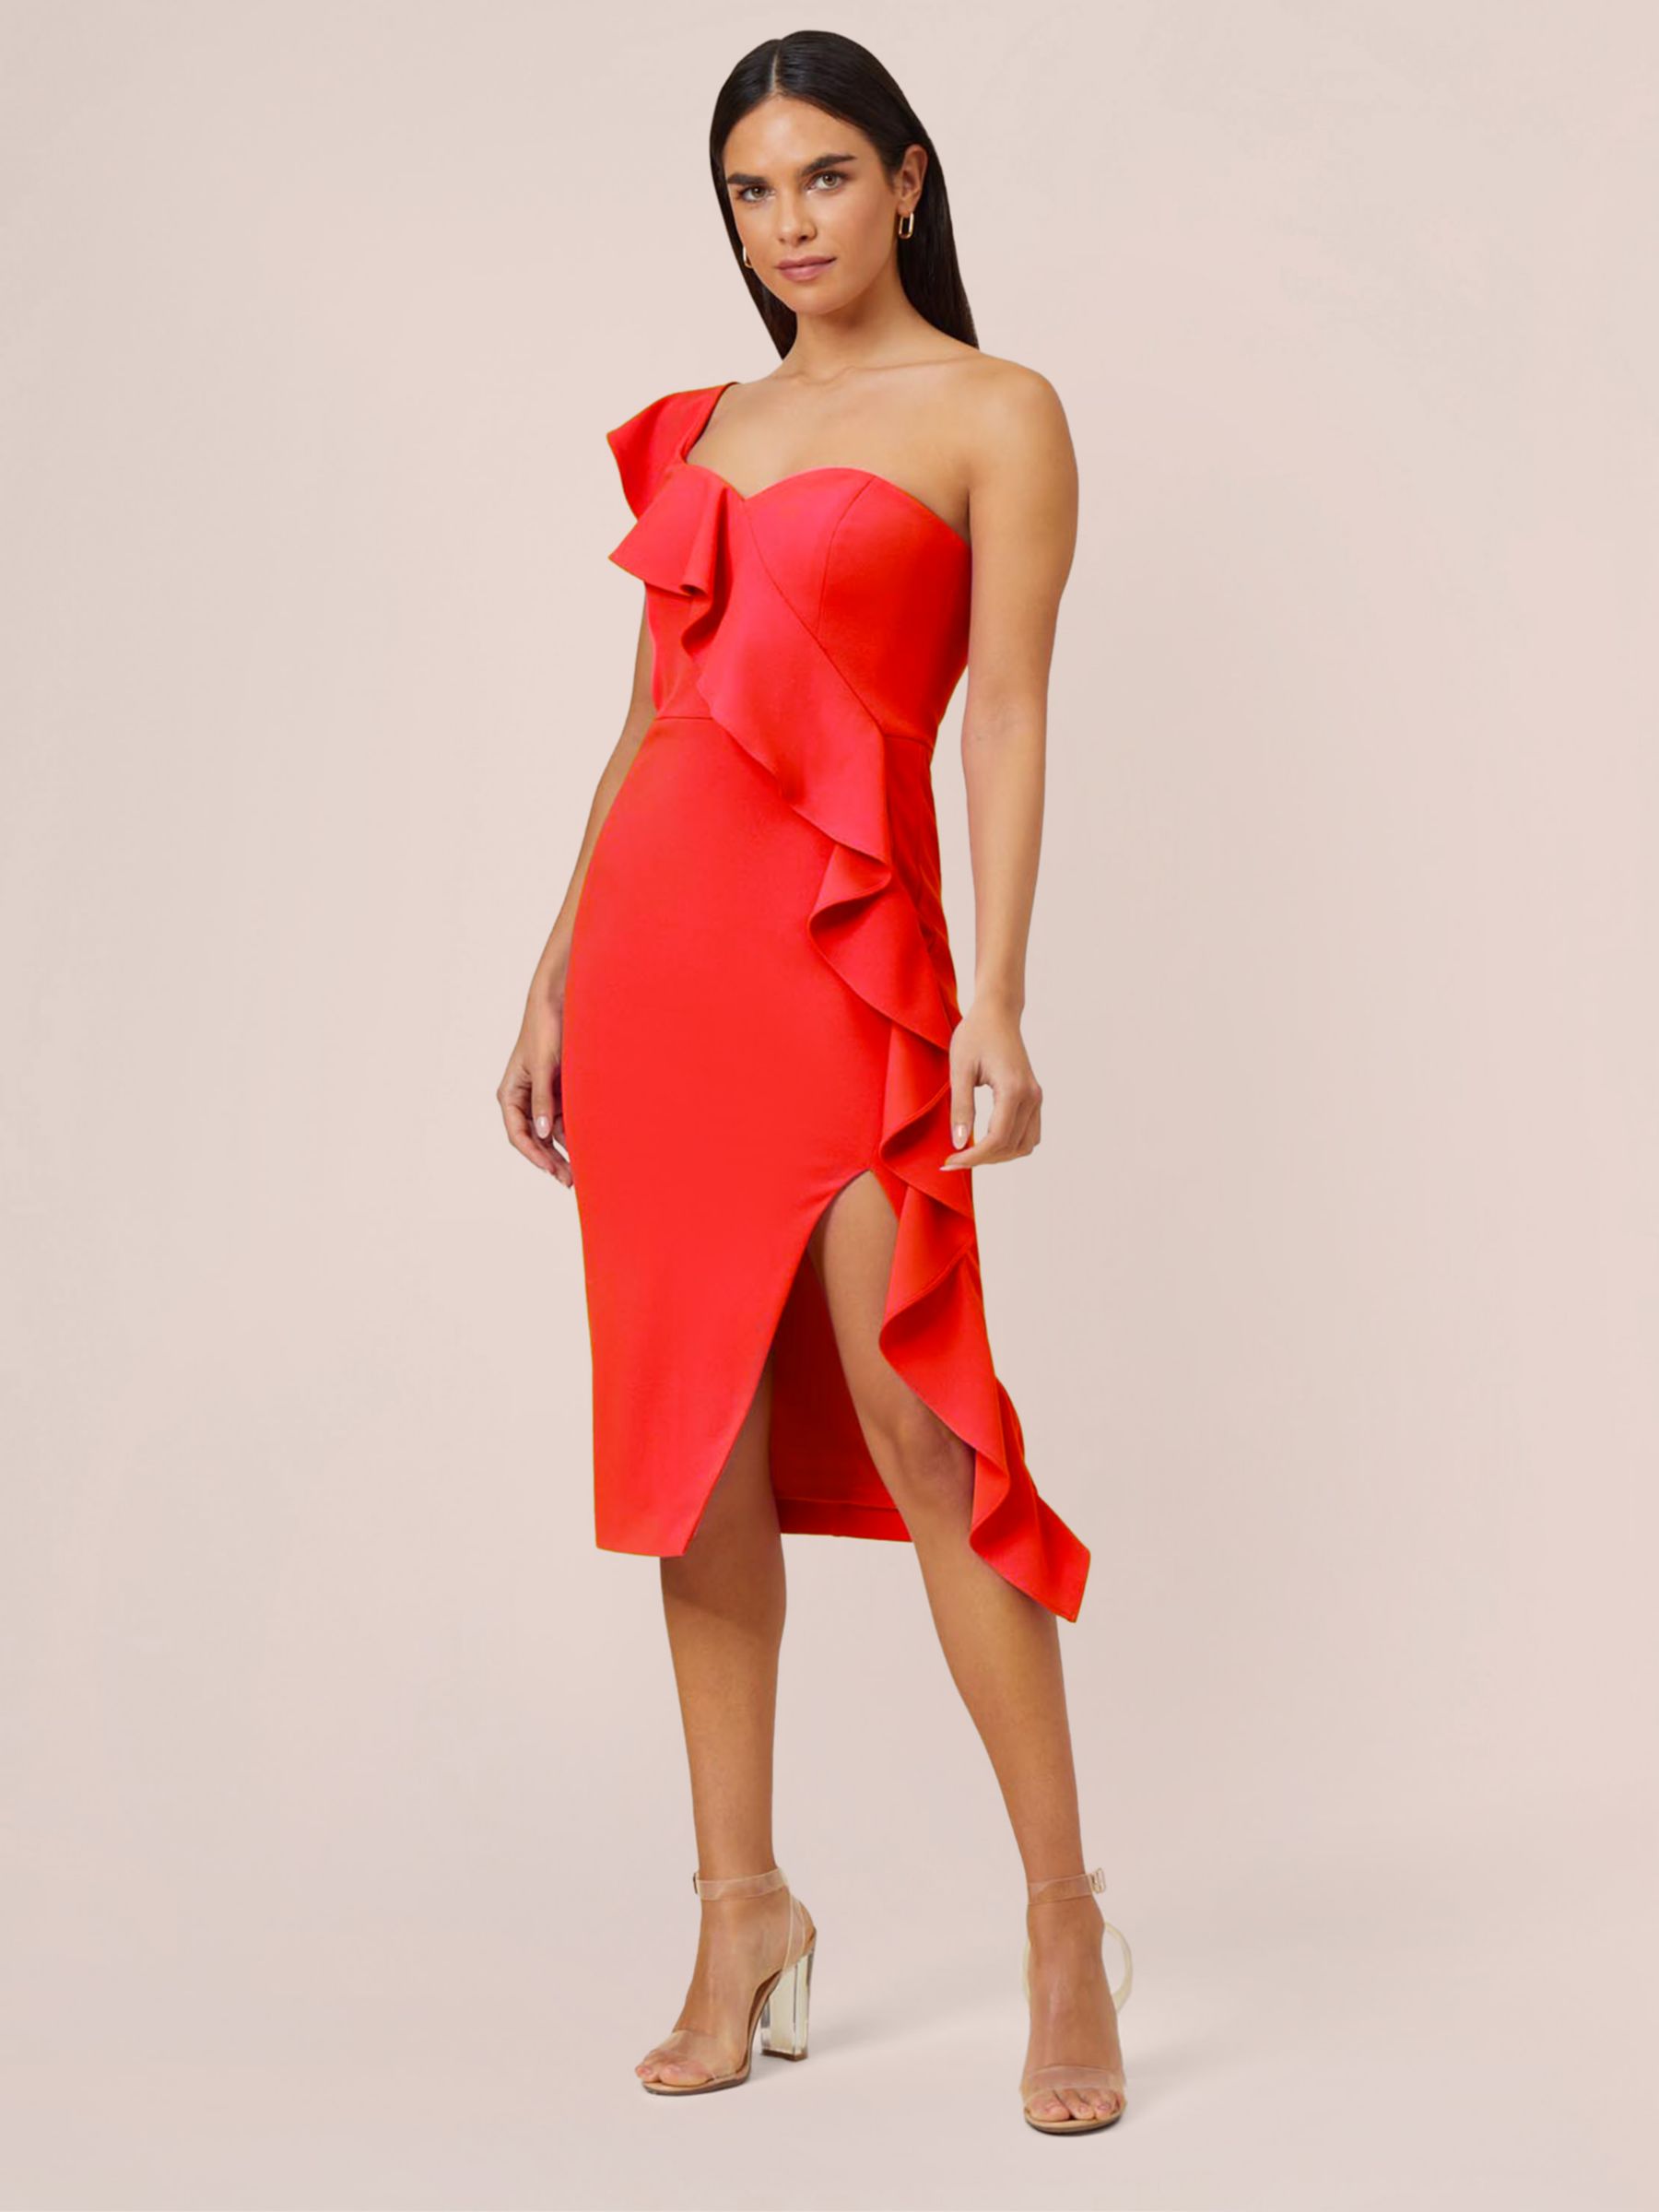 Aidan by Adrianna Papell Knit Crepe Cocktail Dress, Flame Red, 8